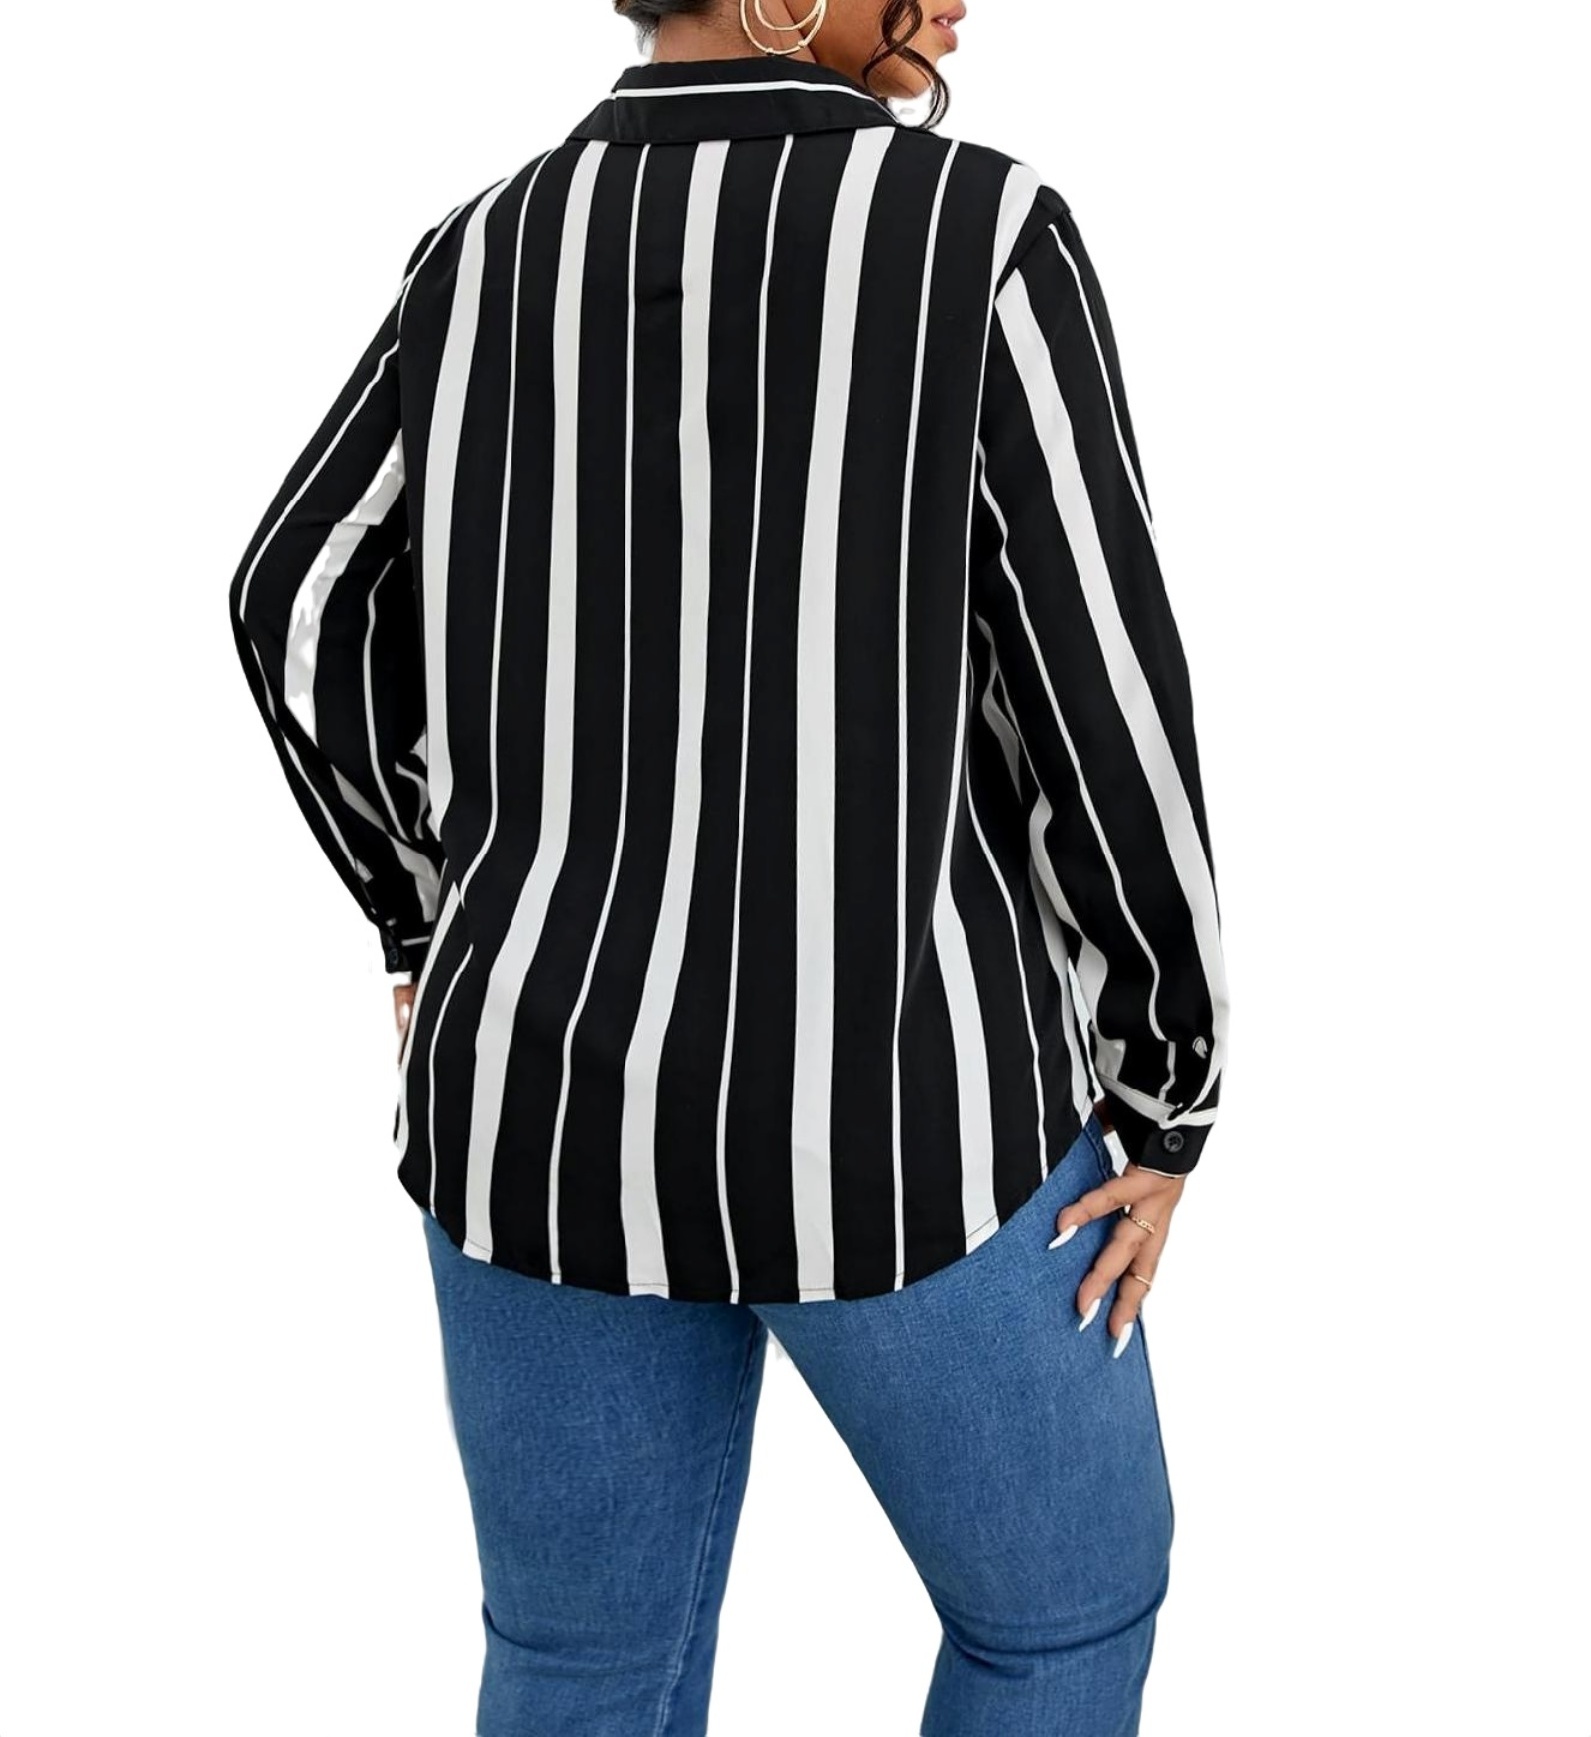 Casual Striped Print Collar Shirt Long Sleeve Black and White Plus Size ...